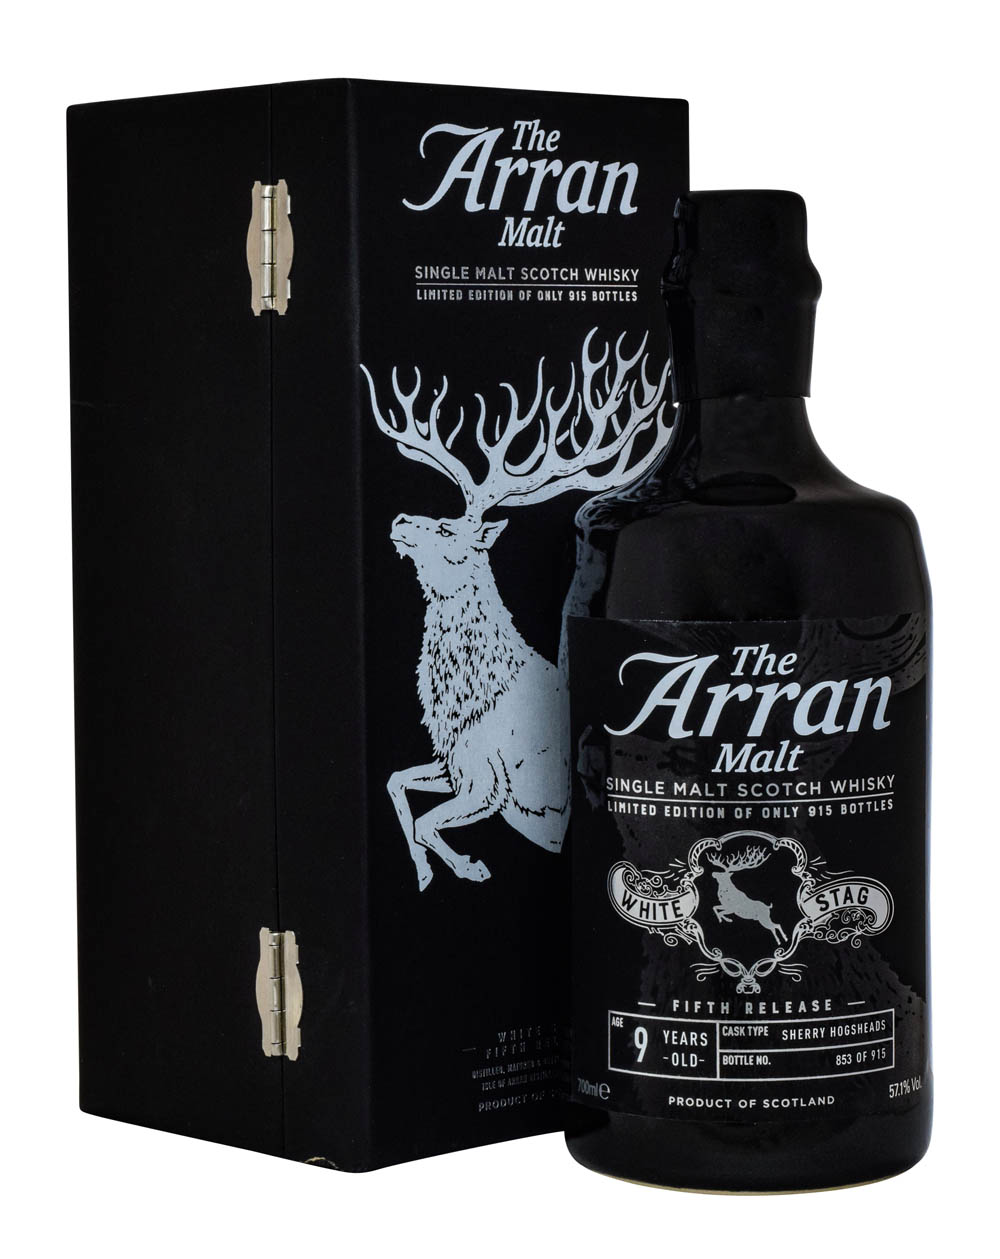 Arran 9 Years Old White Stagg 5th Release Box Musthave Malts MHM